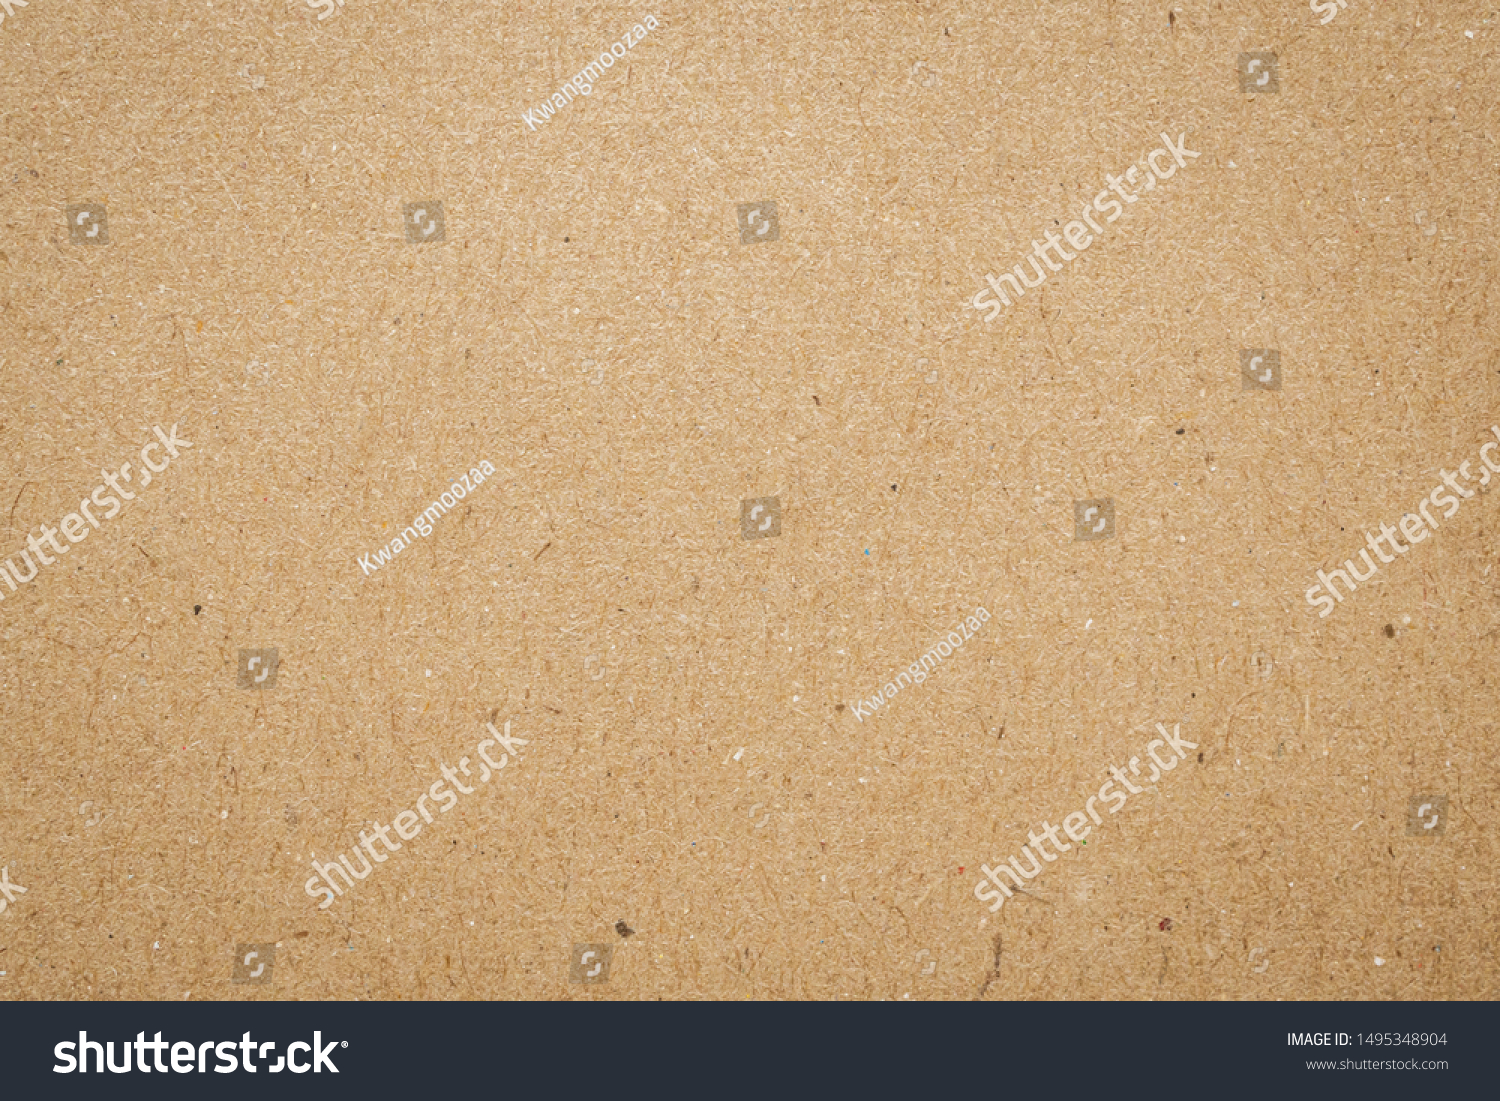 Old brown recycle cardboard paper texture background #1495348904